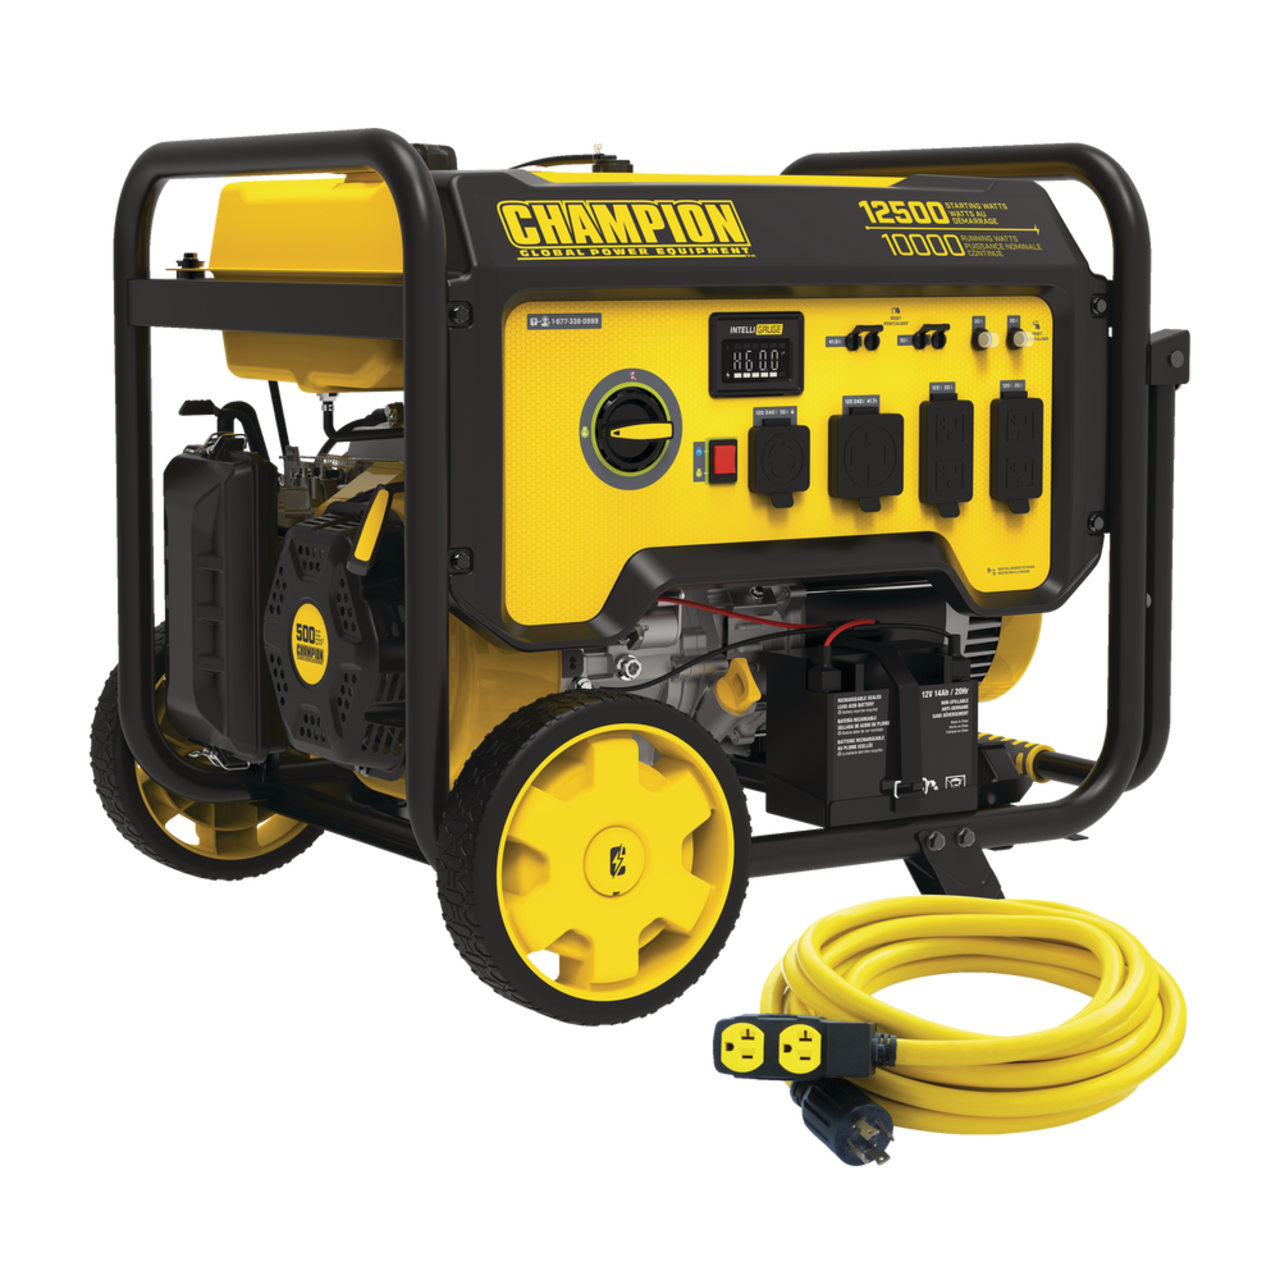 https://media-www.canadiantire.ca/product/seasonal-gardening/outdoor-tools/power-creation/0550363/champion-9200w-11-500w-gas-generator-bf73fd70-6f24-4b55-be52-ce2c2718aa80.png?imdensity=1&imwidth=640&impolicy=mZoom